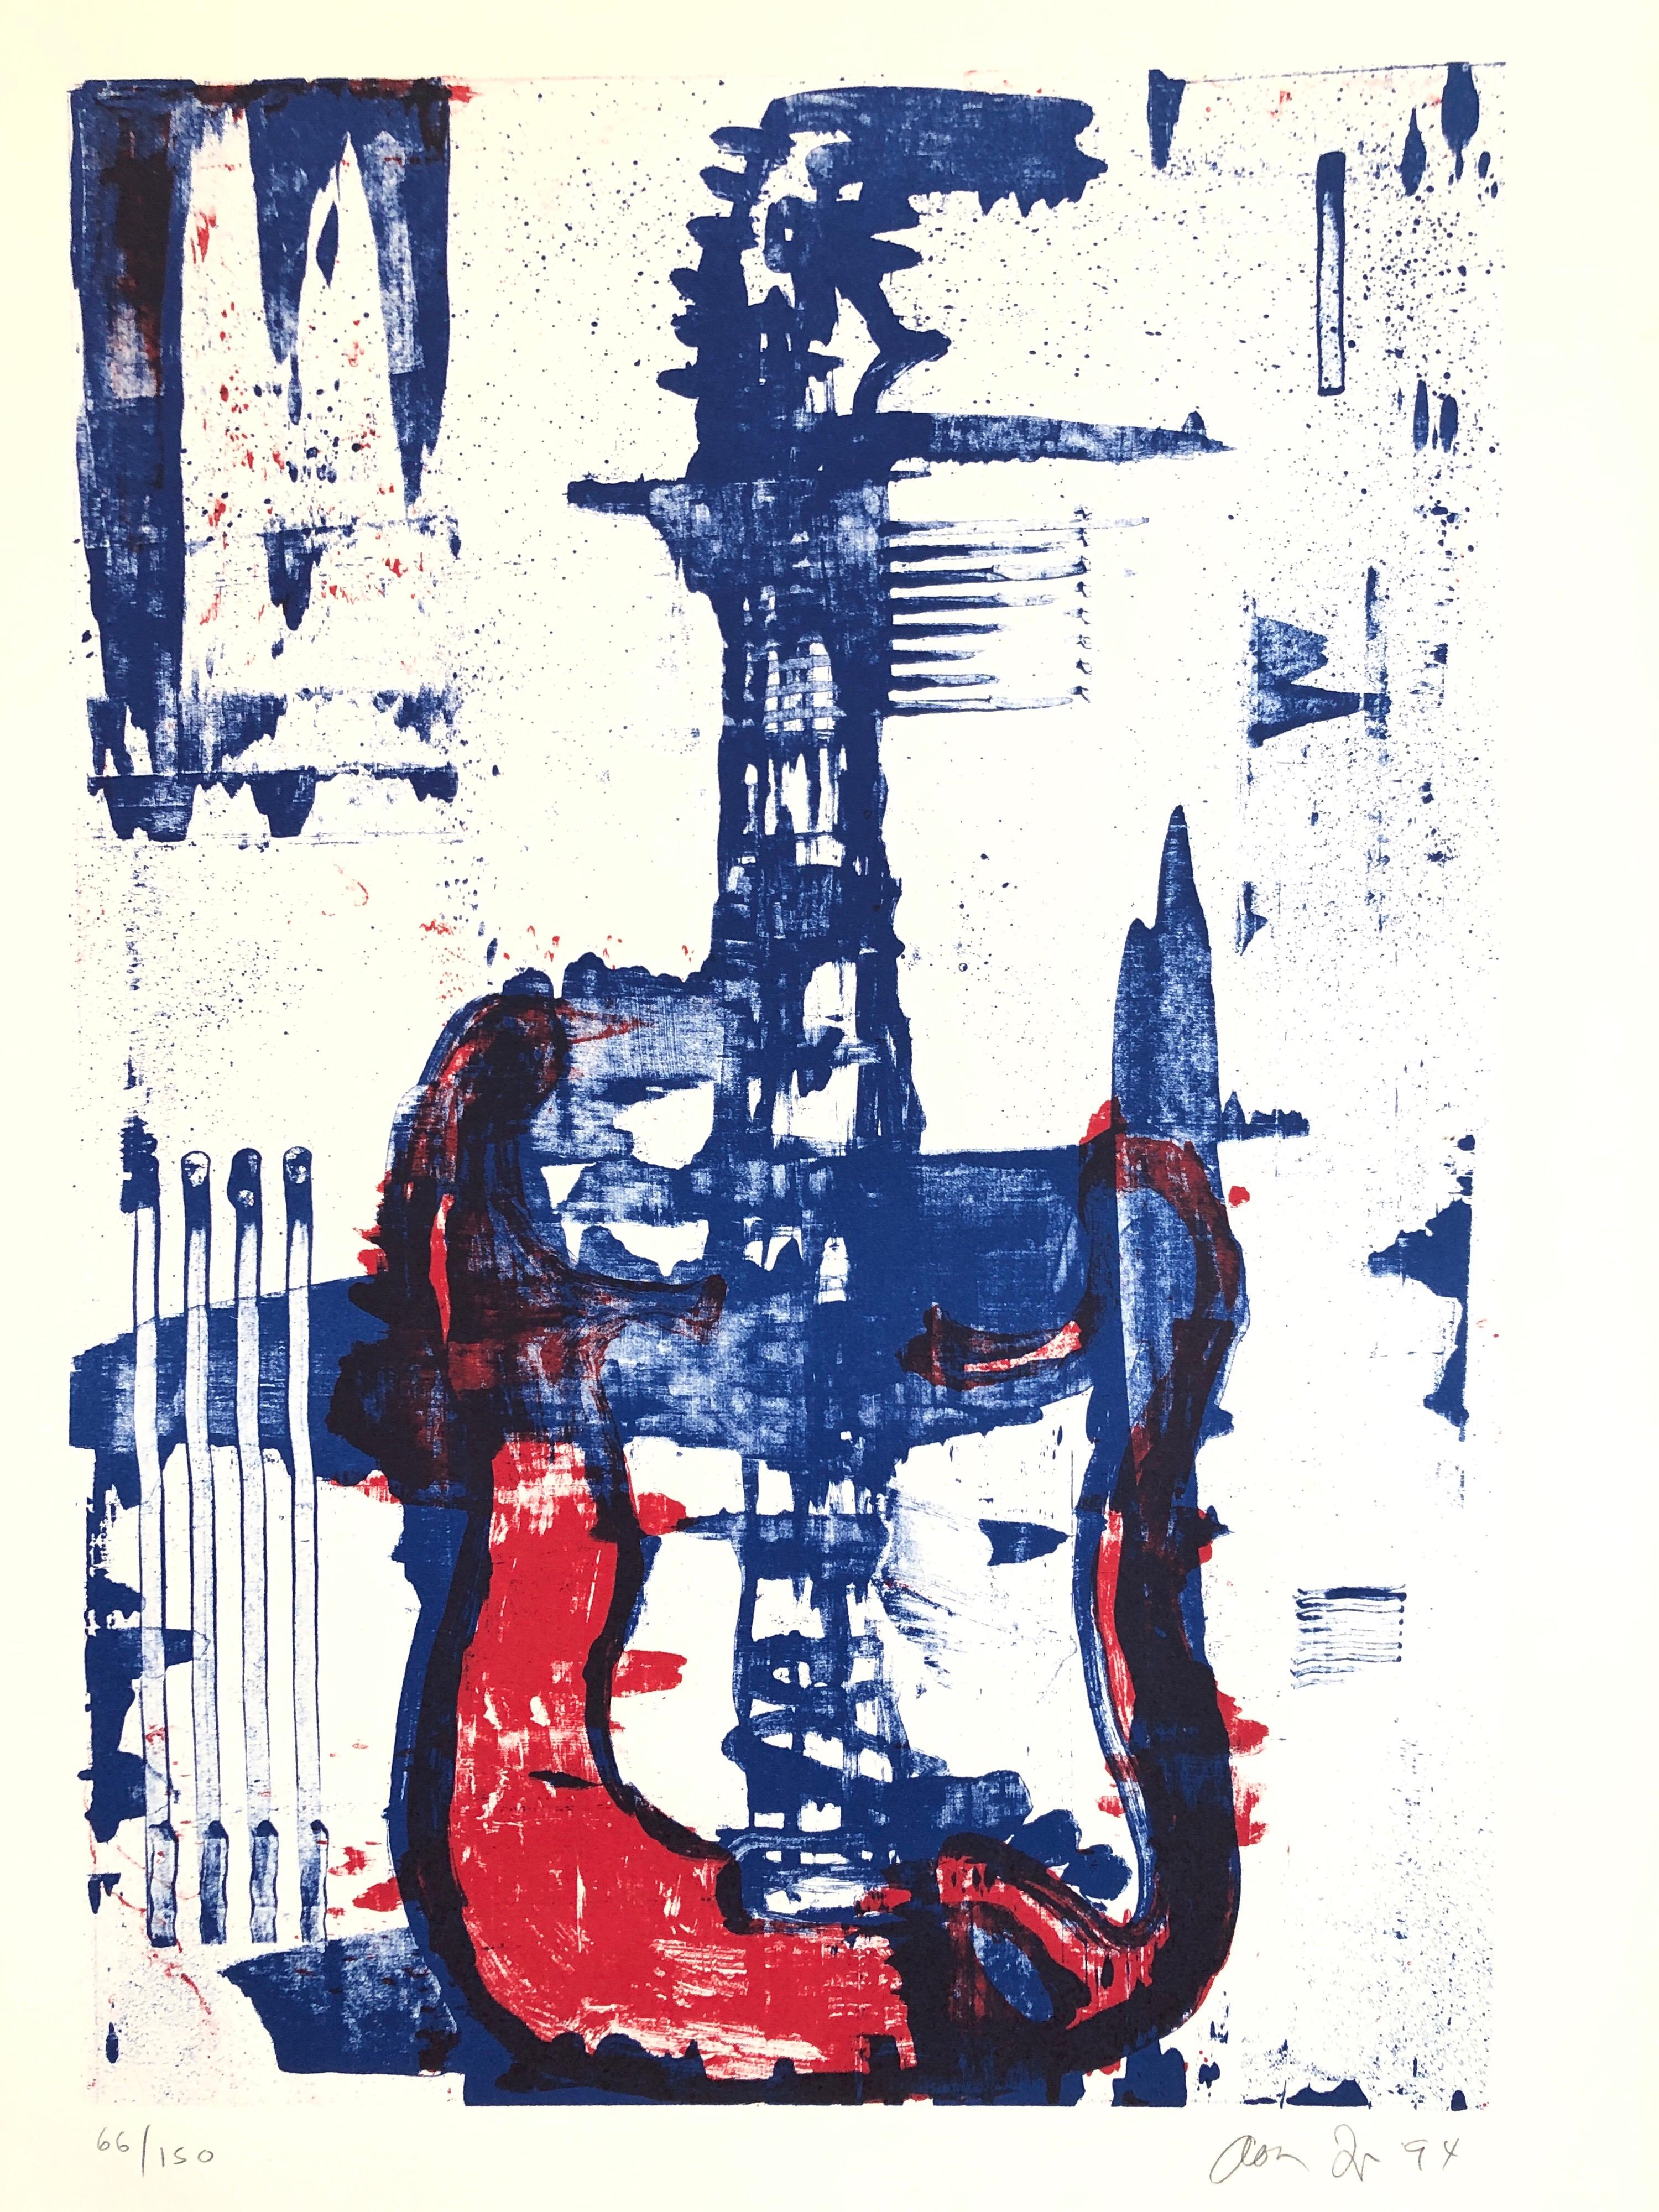 Aaron Fink (American, b. 1955) 
Red, white and denim blue patriotic electric guitar (an iconic image of American Rock and Roll)
Signed and dated "Aaron Fink" lower right
on Arches deckle edged paper. it is pencil signed, dated and numbered in